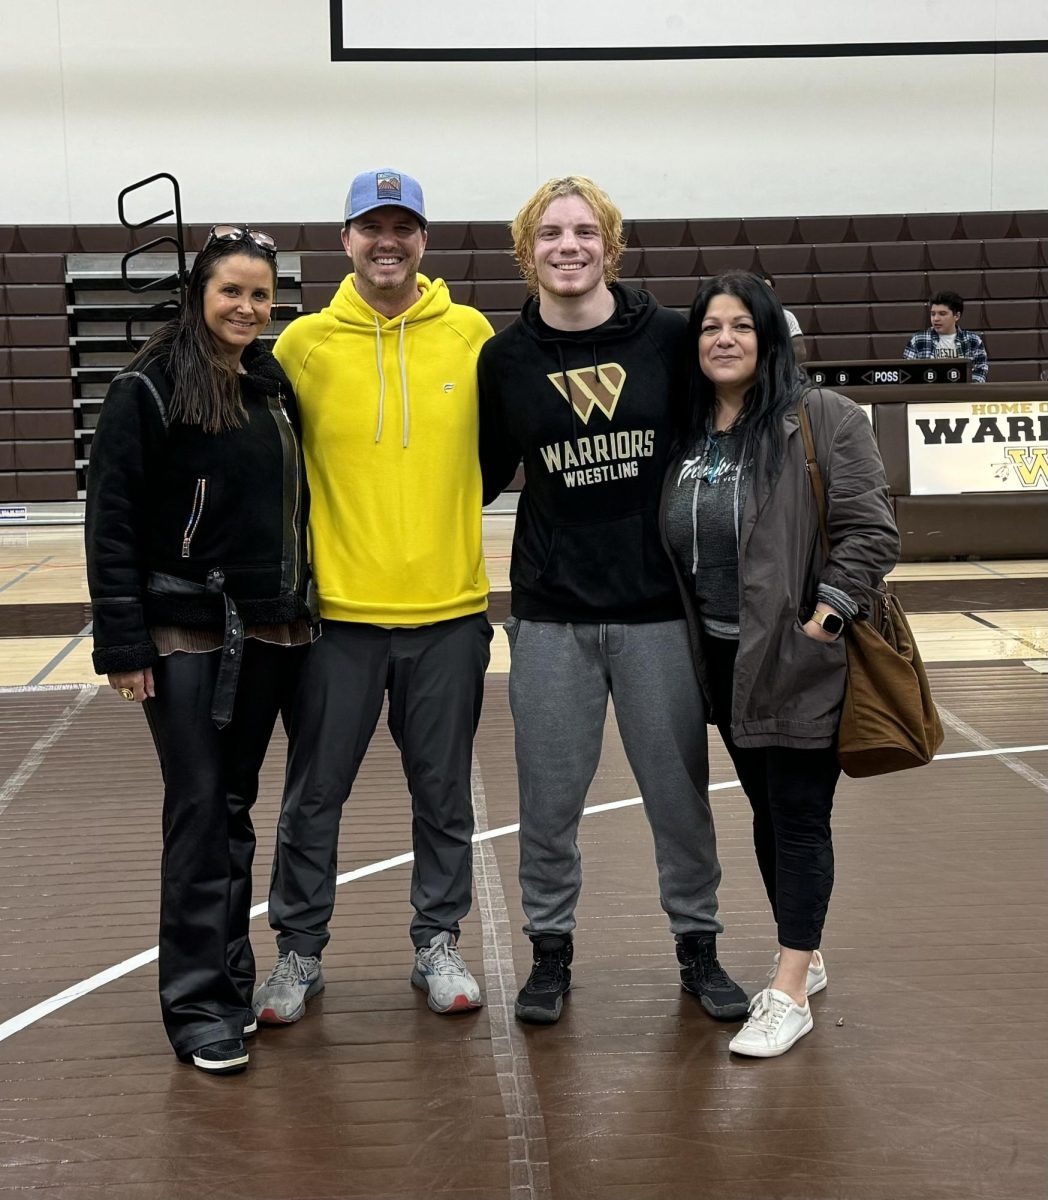 Ethan Rogers (12), post-wrestling-match, shares a triumphant moment with his family. With smiles written across their faces, this encapsulated the pinnacle of Rogerss wrestling journey. 